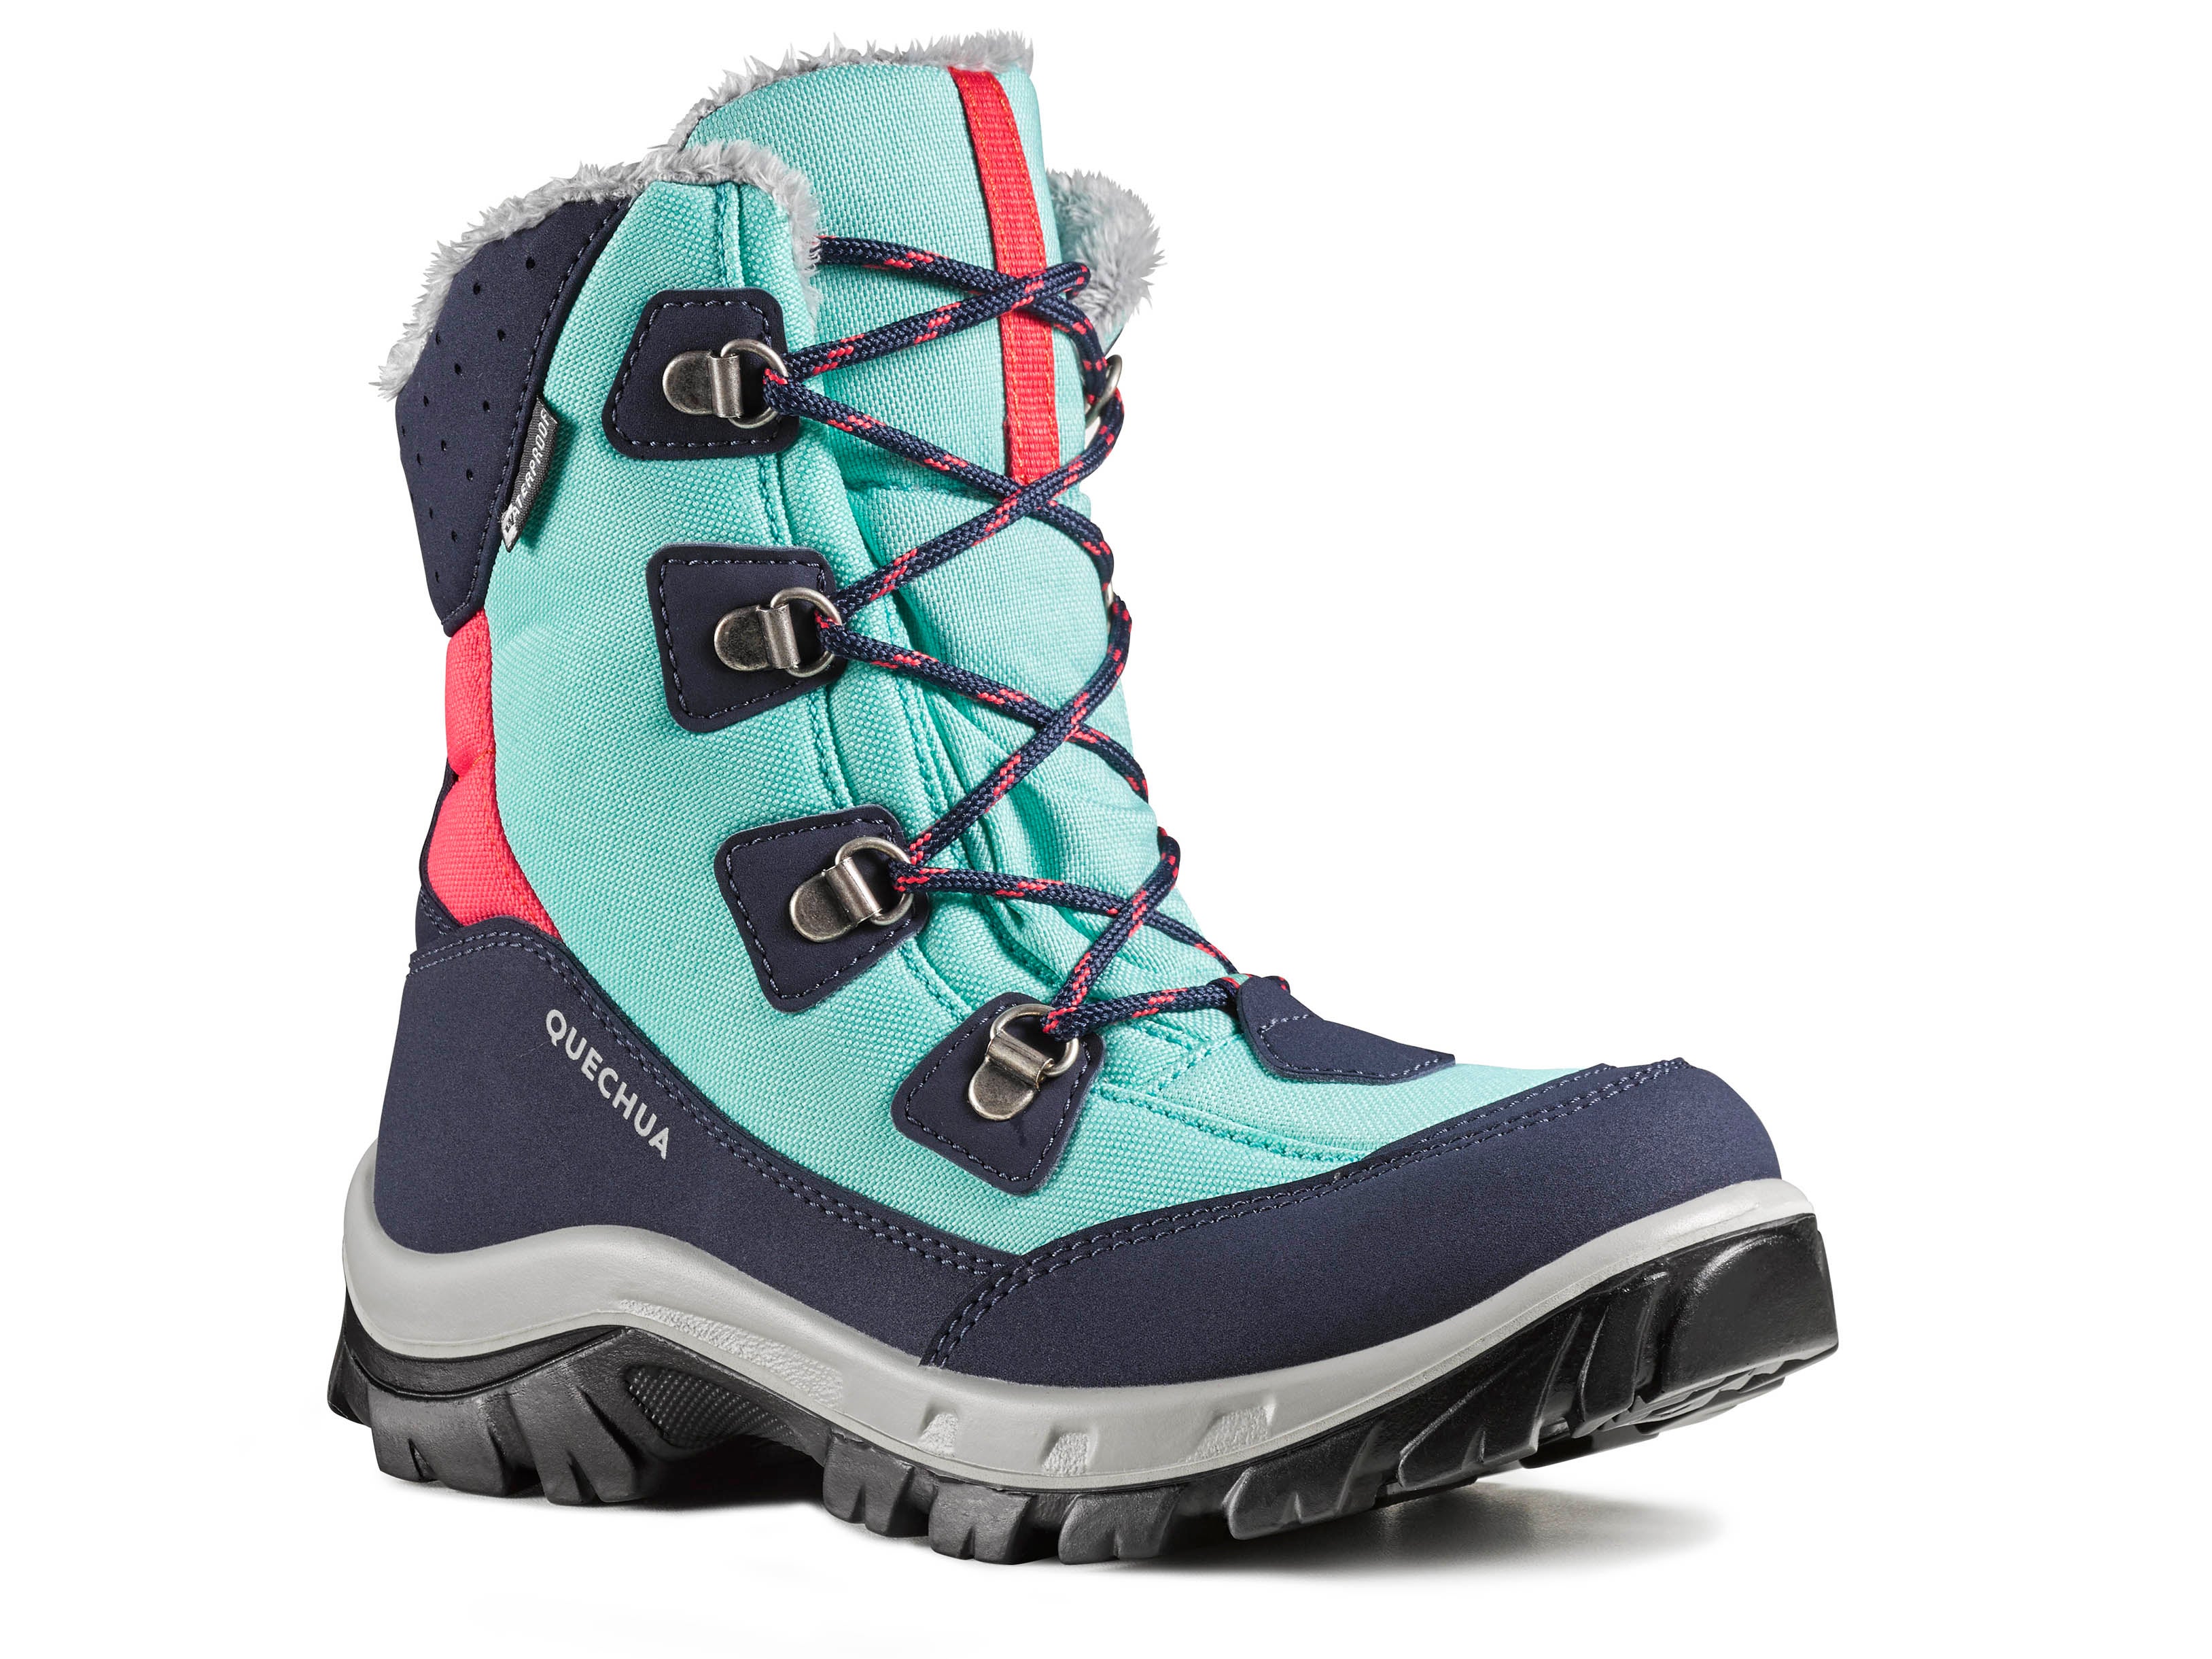 Best kids' snow boots 2020 for winter 